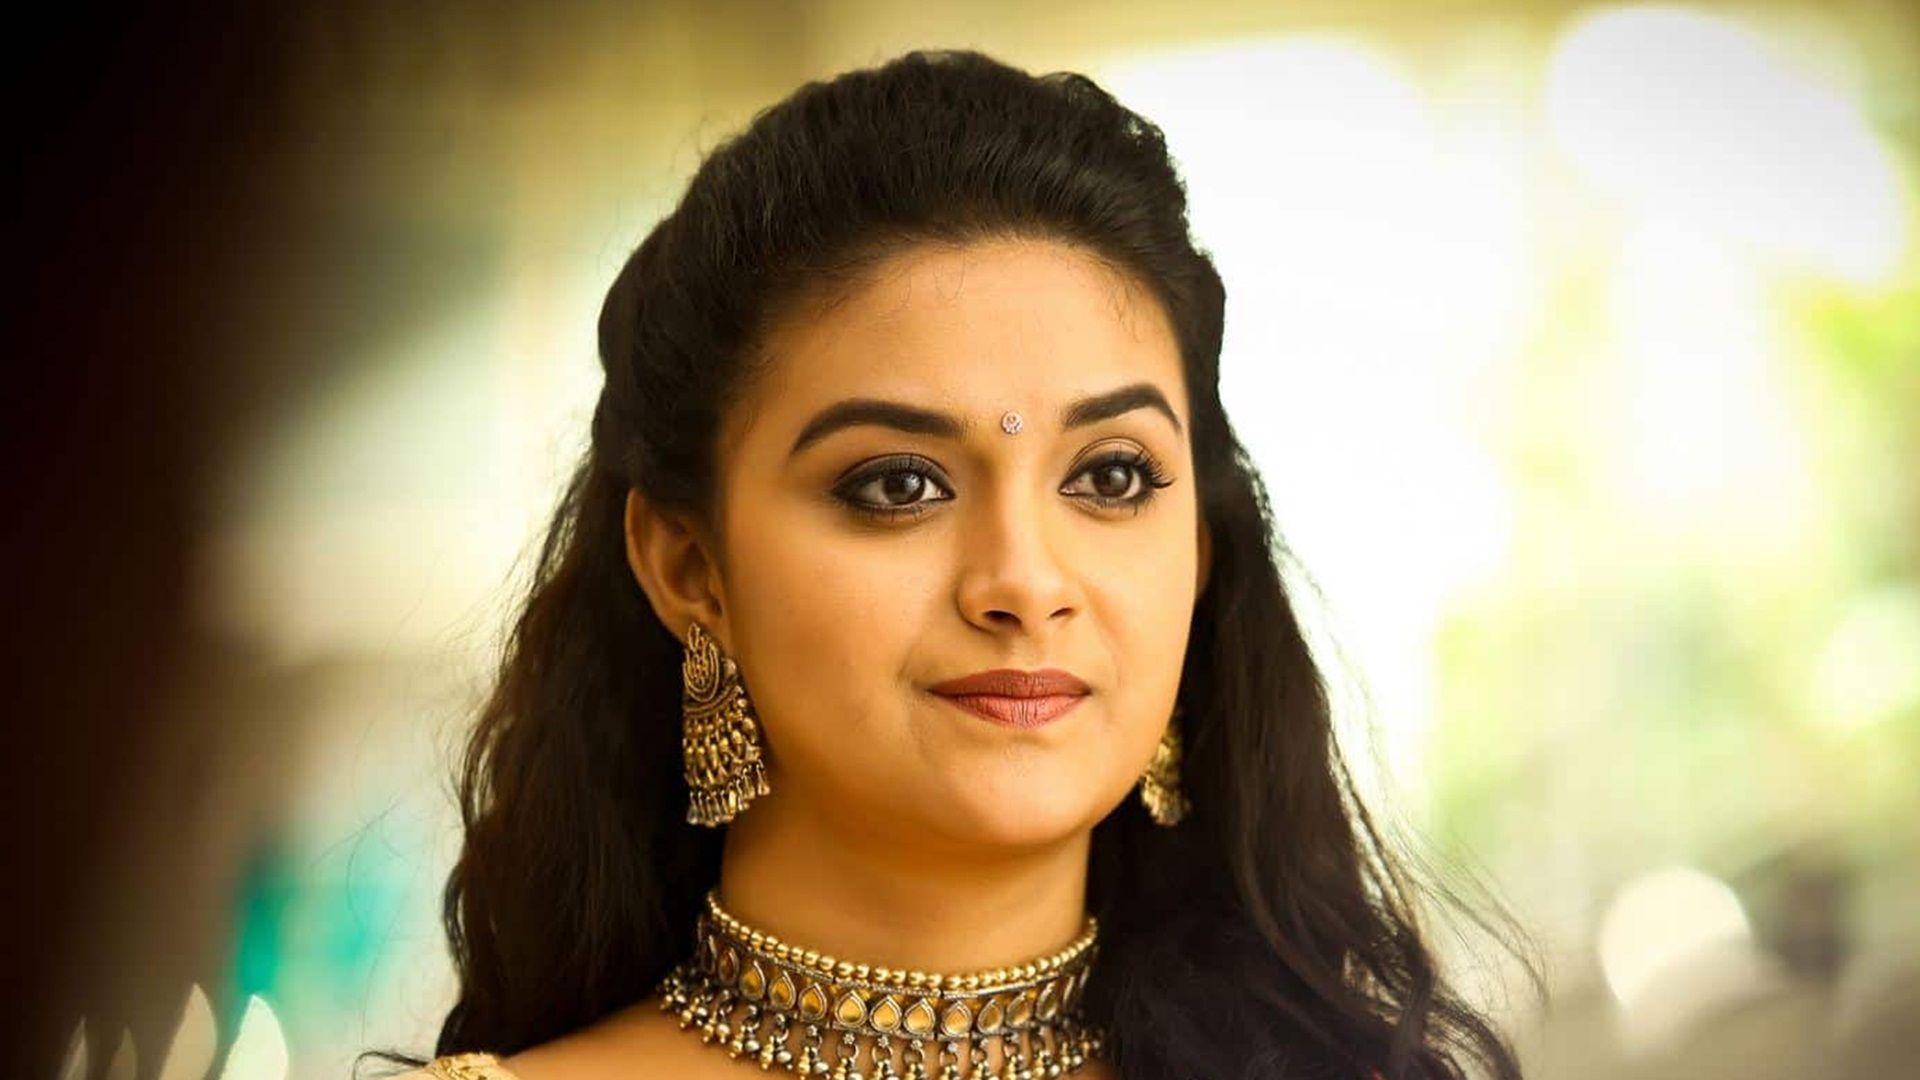 Keerthi Suresh 4k Wallpapers Top Free Keerthi Suresh 4k Backgrounds Wallpaperaccess Keerthi suresh wallpapers hd 2019 app is to not only setting keerthi suresh photos as wallpapers but also share & save selected favorite image. keerthi suresh 4k wallpapers top free